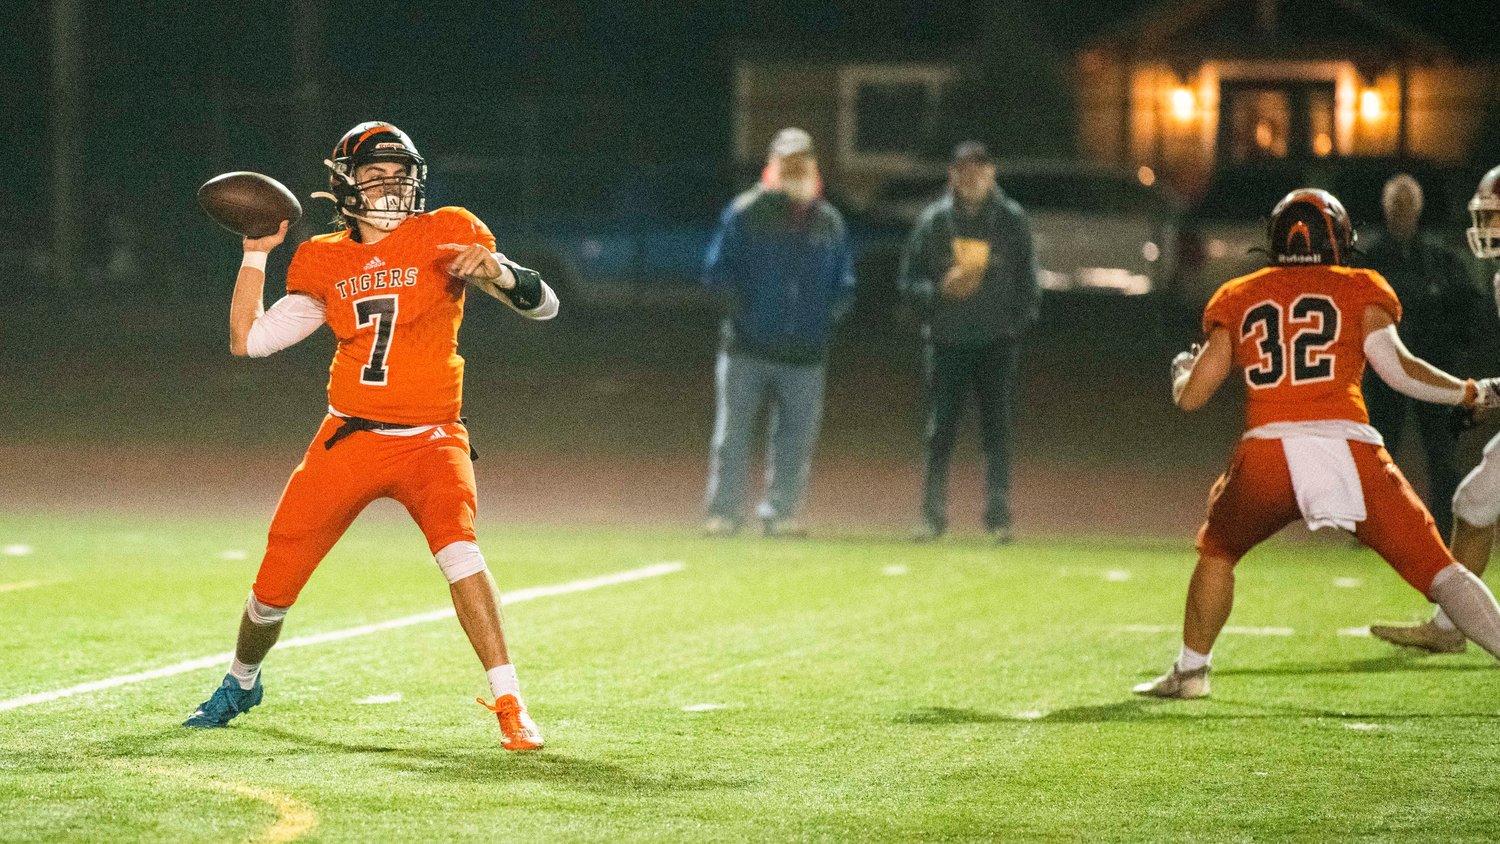 Centralia senior Tommy Billings (7) looks to pass Friday night during a game at Tiger Stadium.